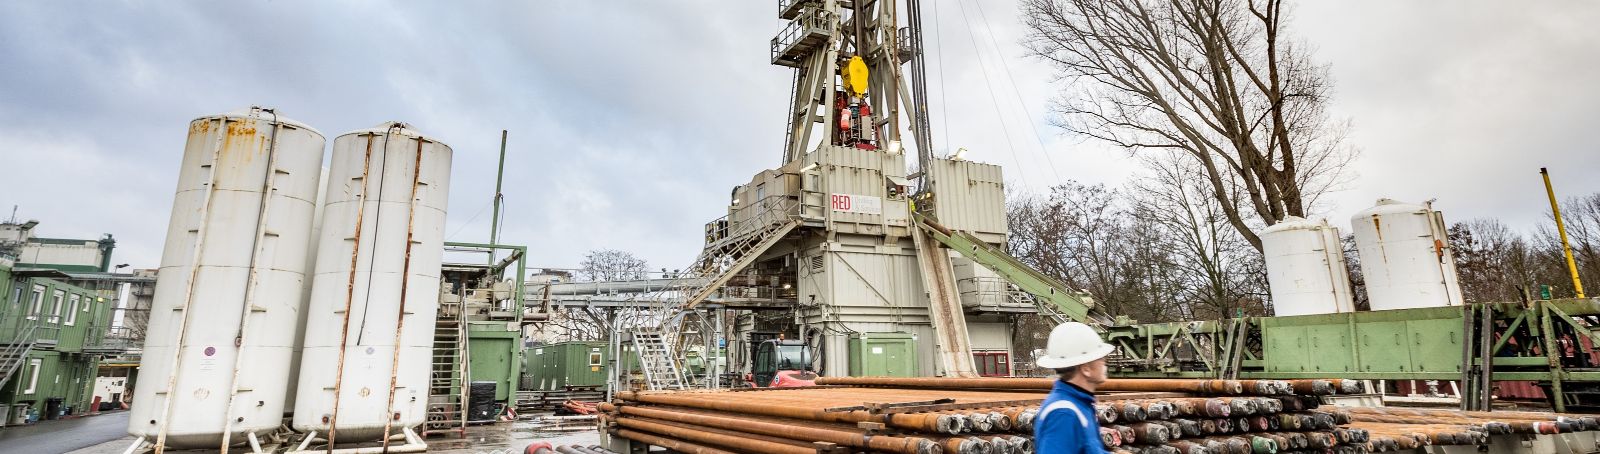 Two laterally deflected boreholes were drilled into the geothermal reservoir, a 130-metre-thick and 45-million-year-old sandstone layer. The drilling rig is about 40 metres high. (Photographs from 2022)